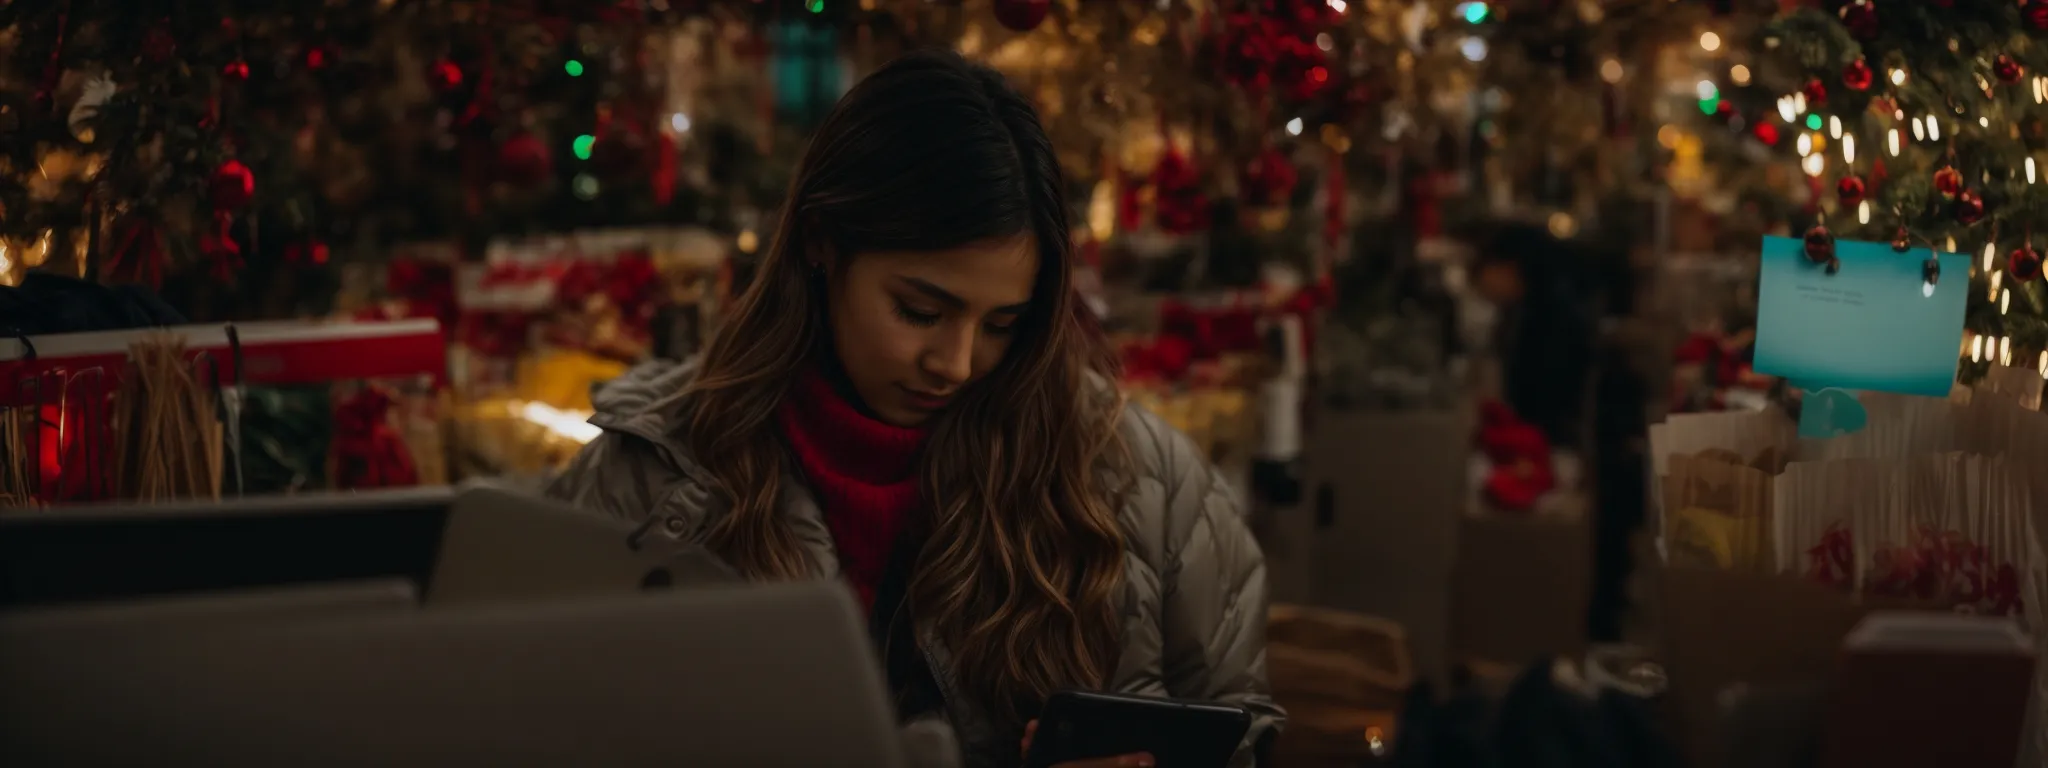 a person shopping on an online store using a smartphone amidst holiday decorations.